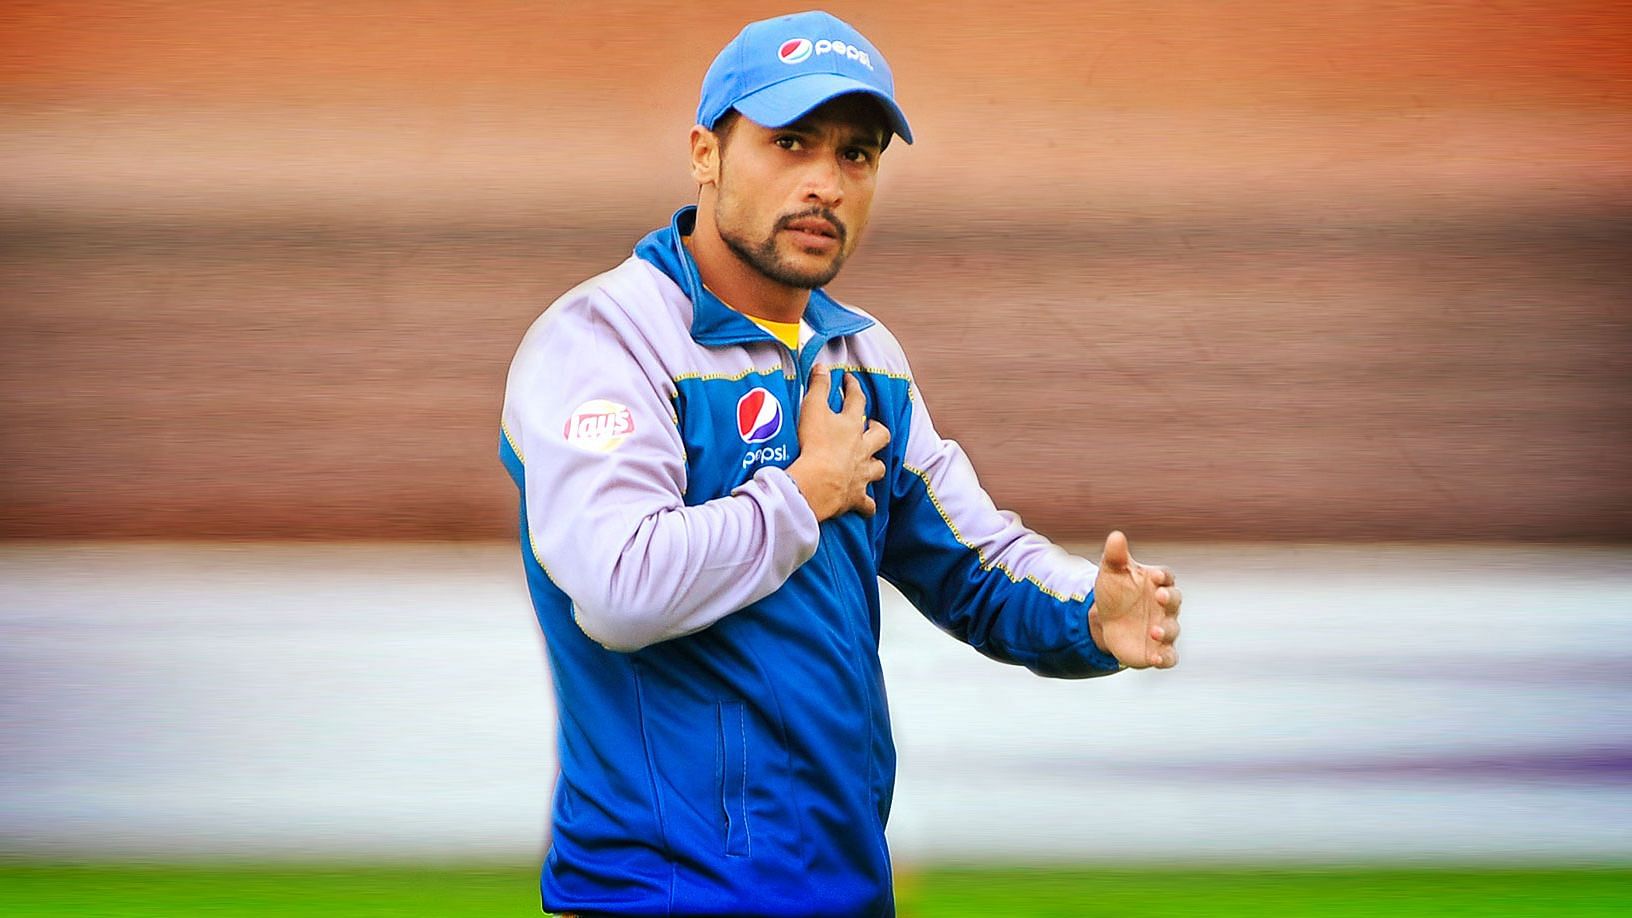 Amir has has been riddled with poor form and fitness concerns in the recent past.